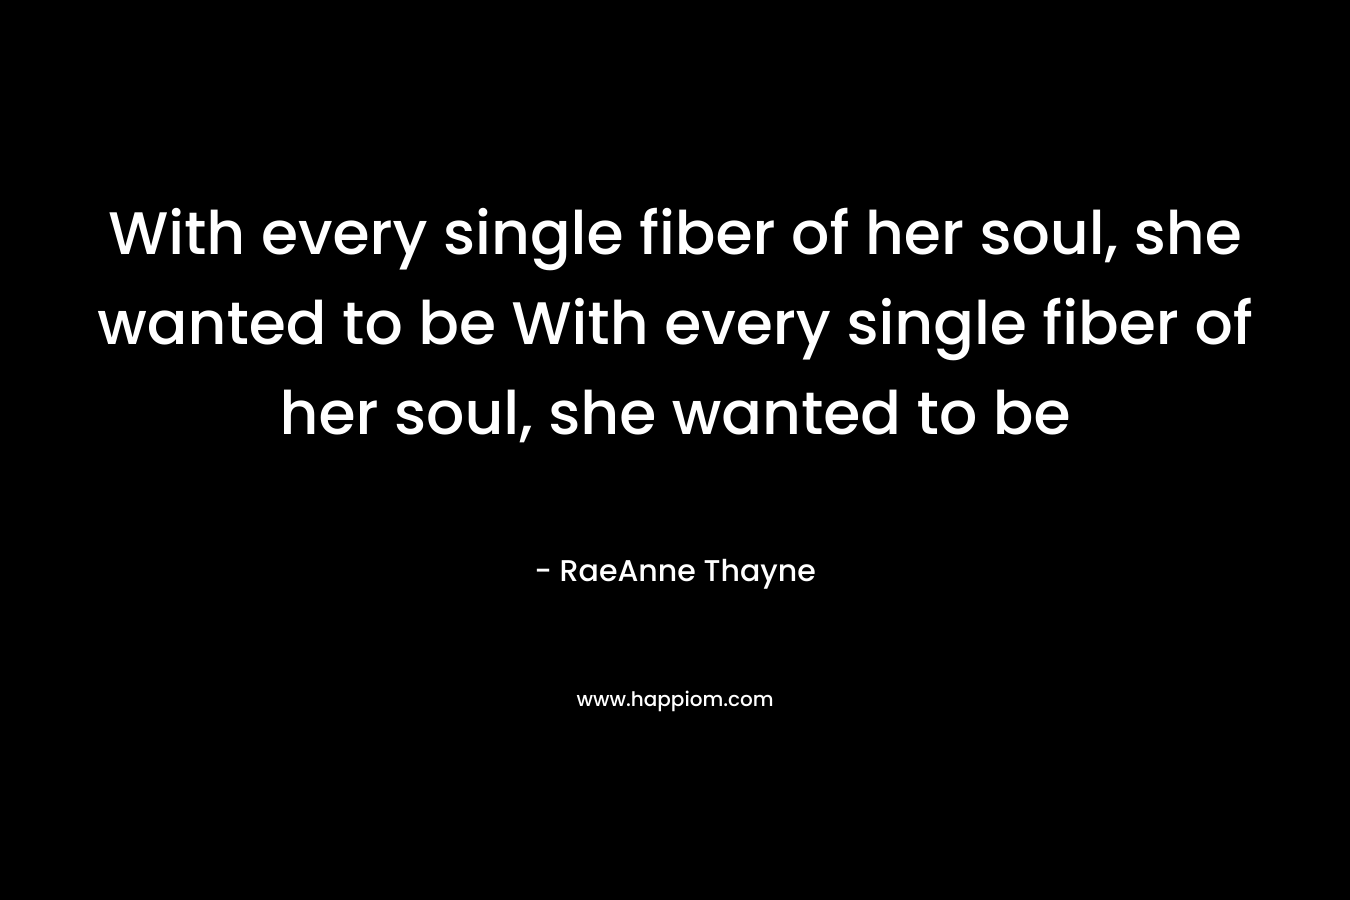 With every single fiber of her soul, she wanted to be With every single fiber of her soul, she wanted to be – RaeAnne Thayne